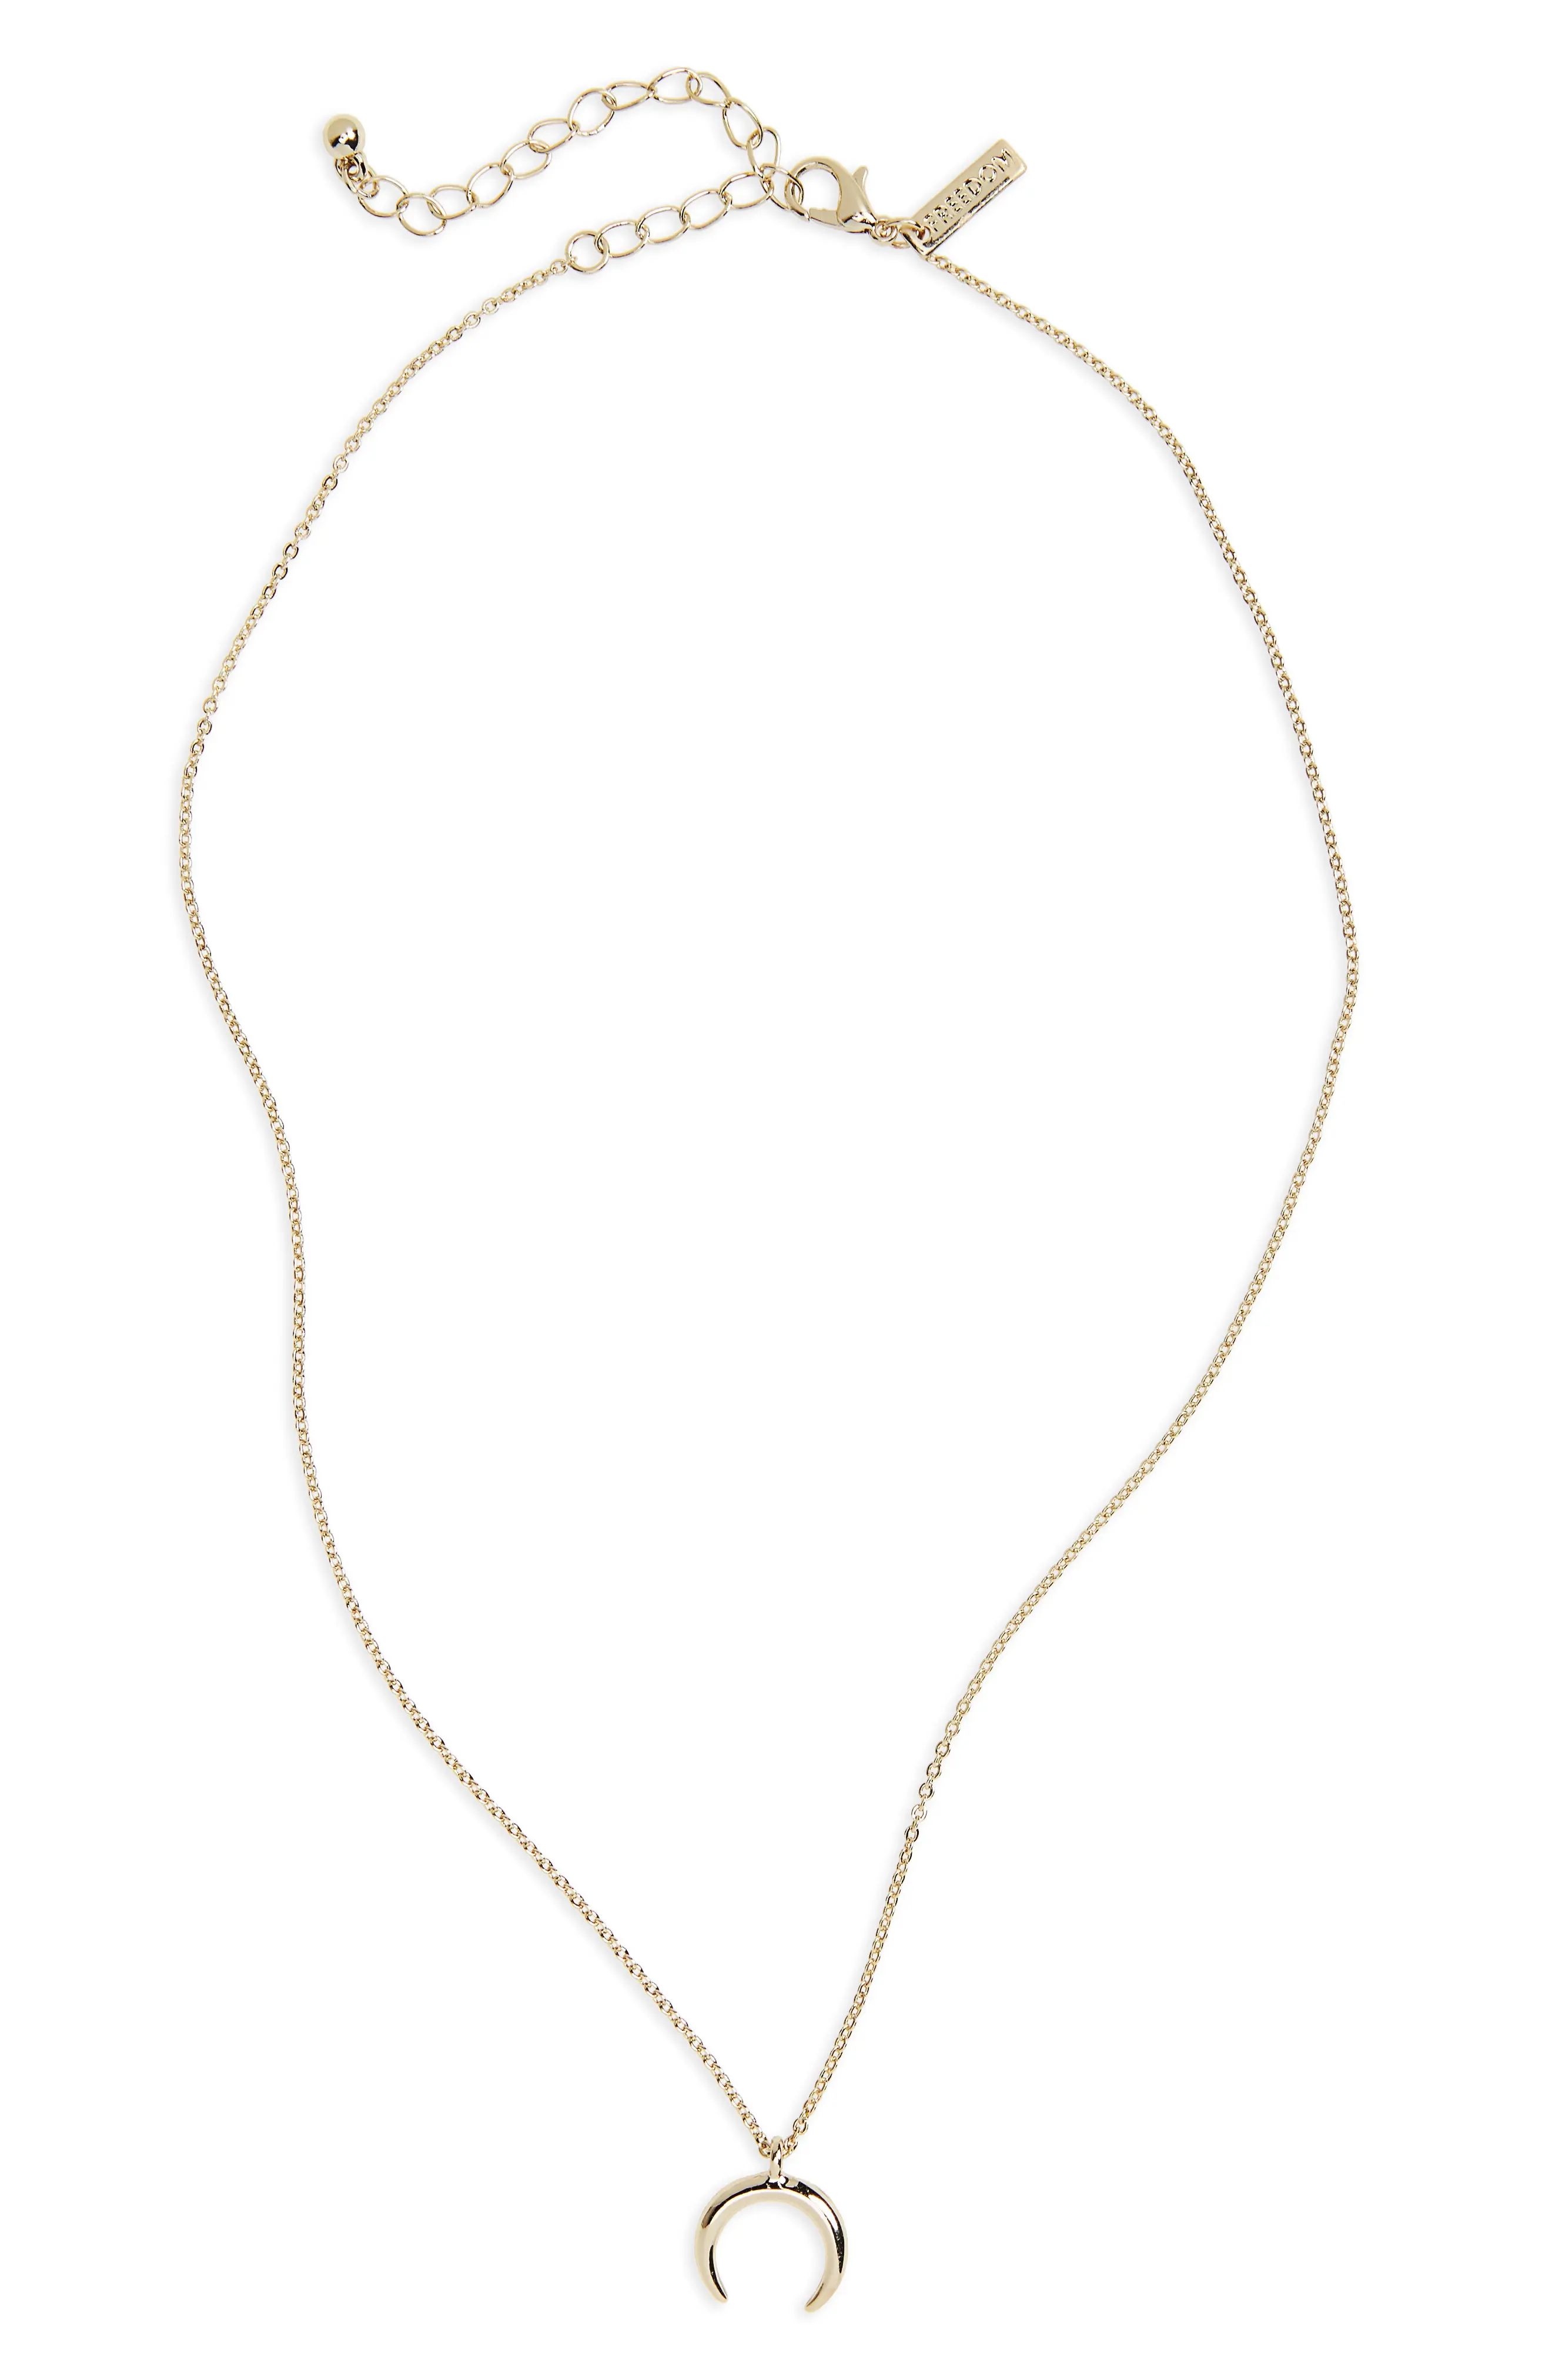 Horn Charm Necklace | Nordstrom